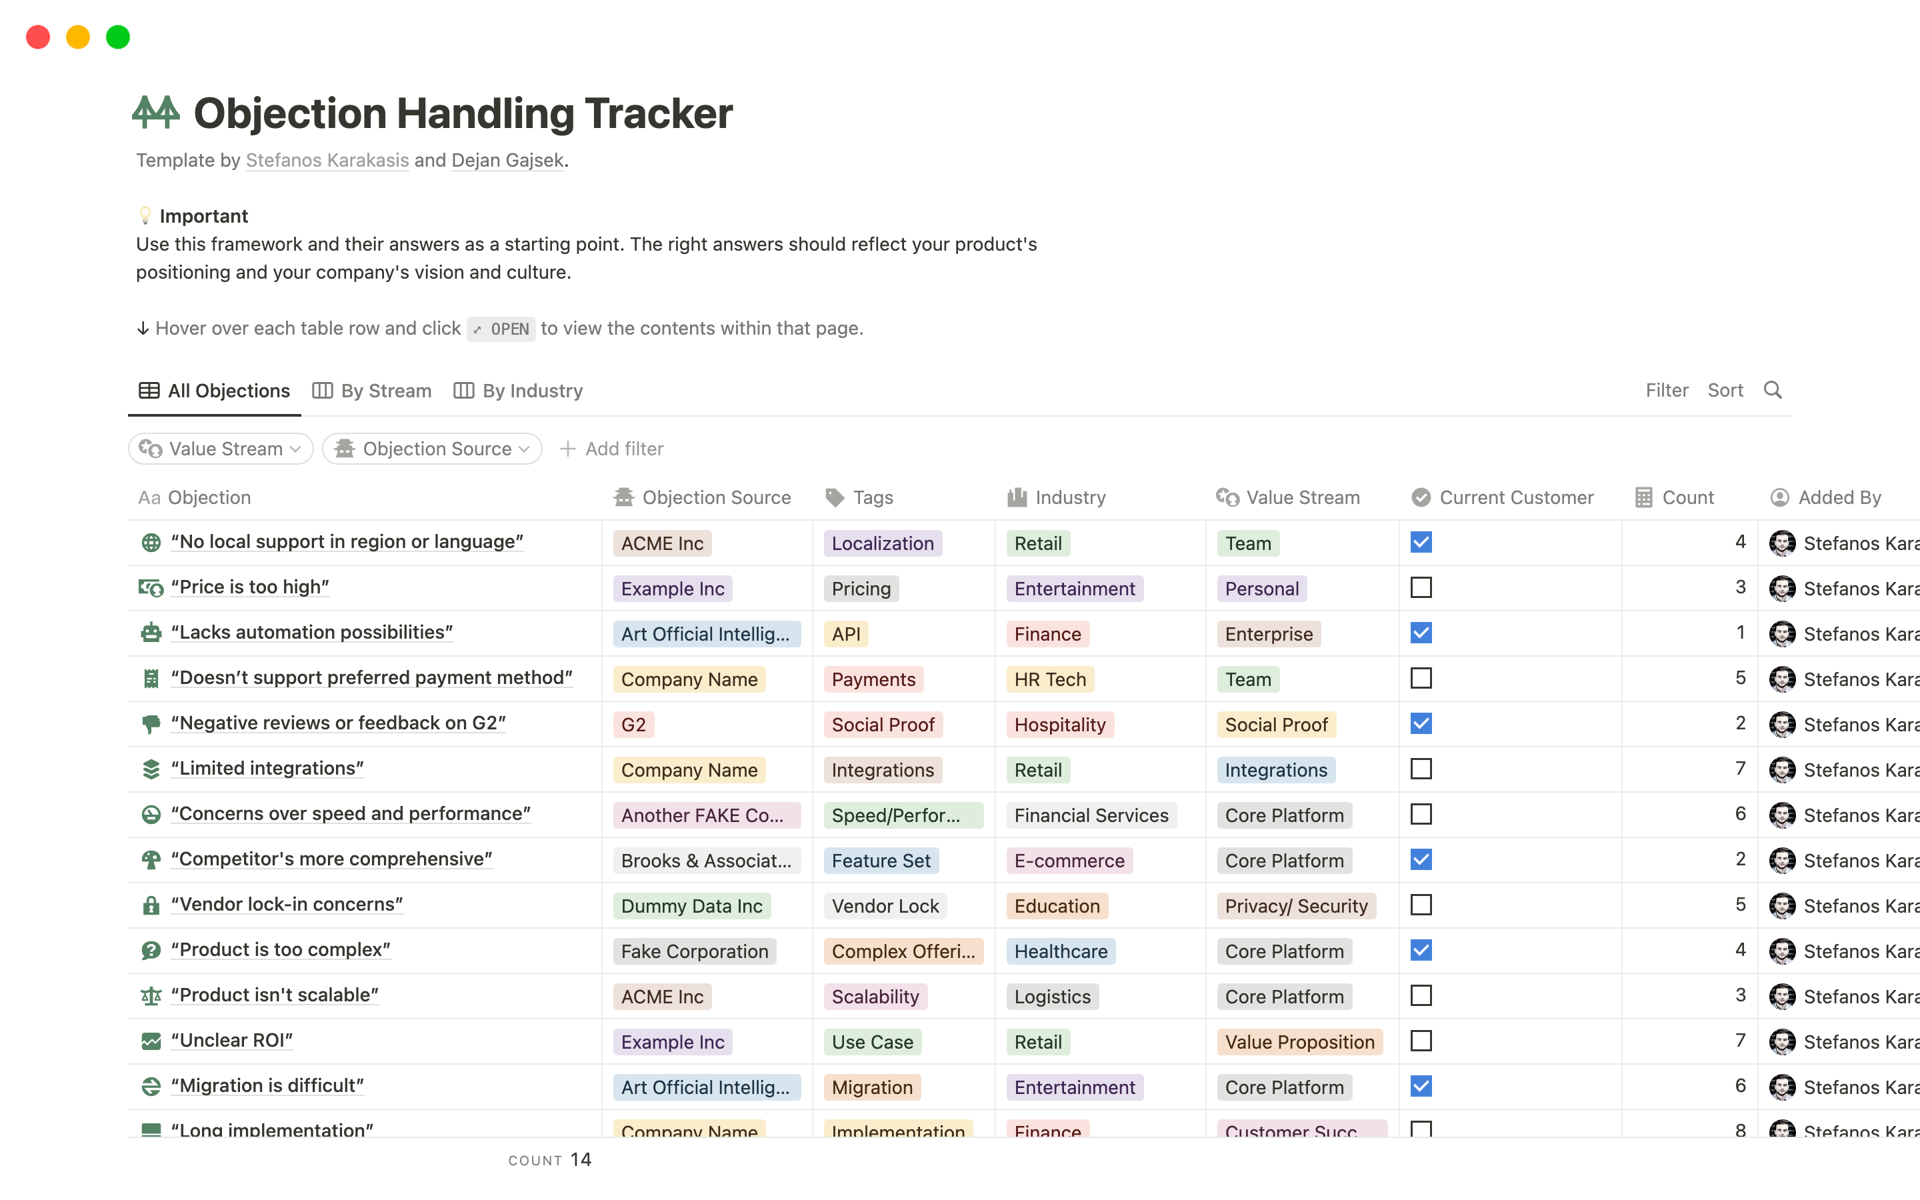 This Objection Handling Tracker template will help you create consistent answers so that your Sales team always has an answer to turn the conversation around.